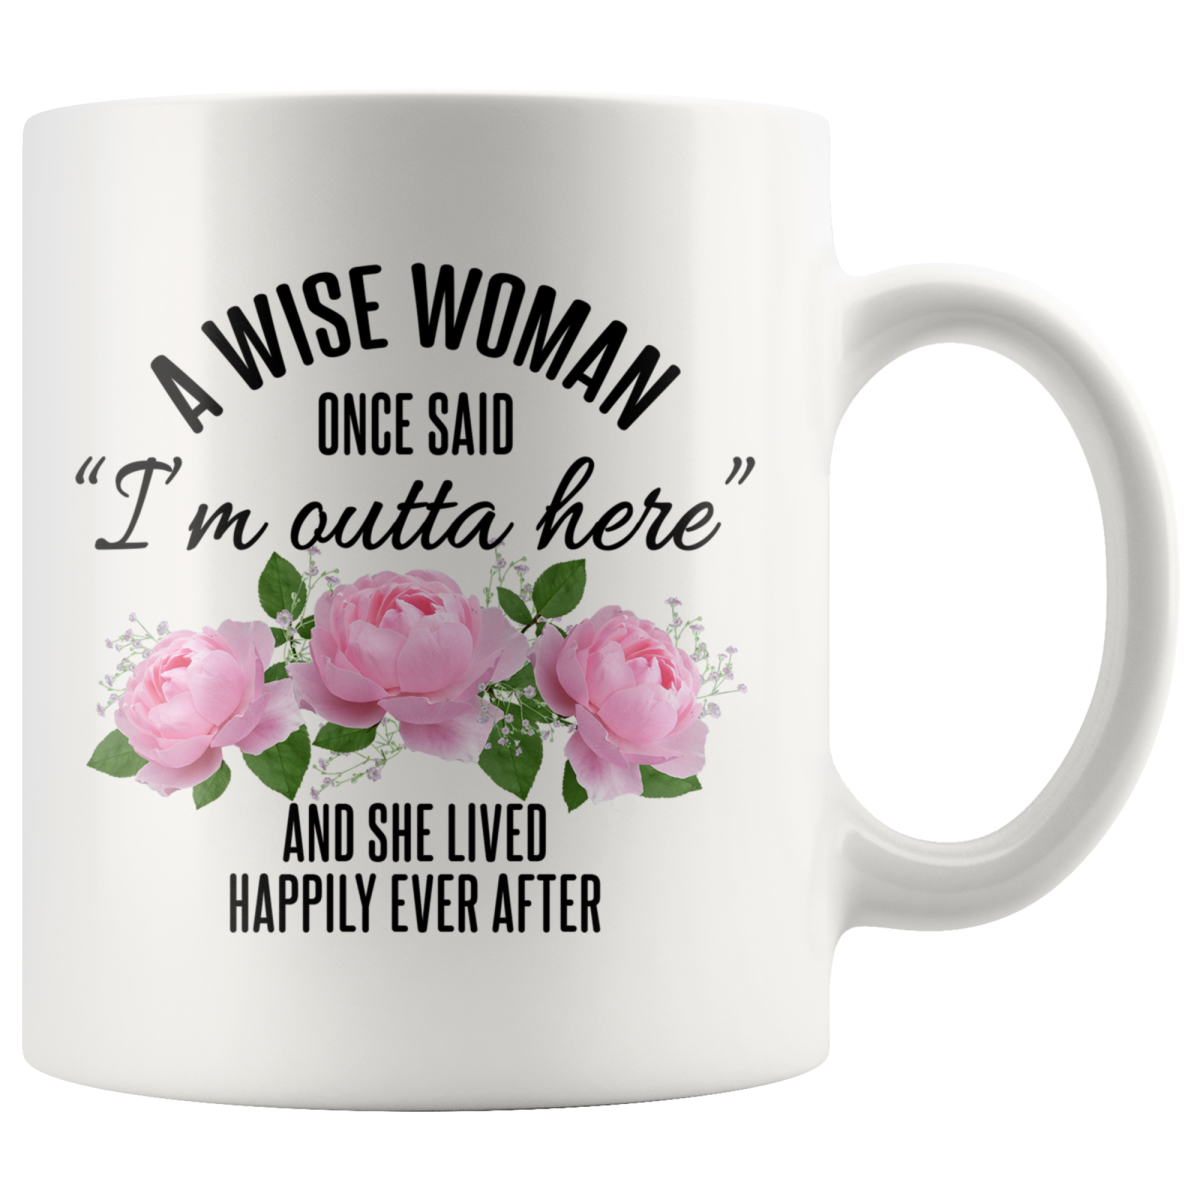 https://backyardpeaks.com/cdn/shop/products/retirement-gifts-for-women-funny-gift-from-coworkers-a-wise-woman-once-said-coffee-mug-11oz-white-11-oz-mugs-drinkware-backyardpeaks-222_1200x.png?v=1586386587